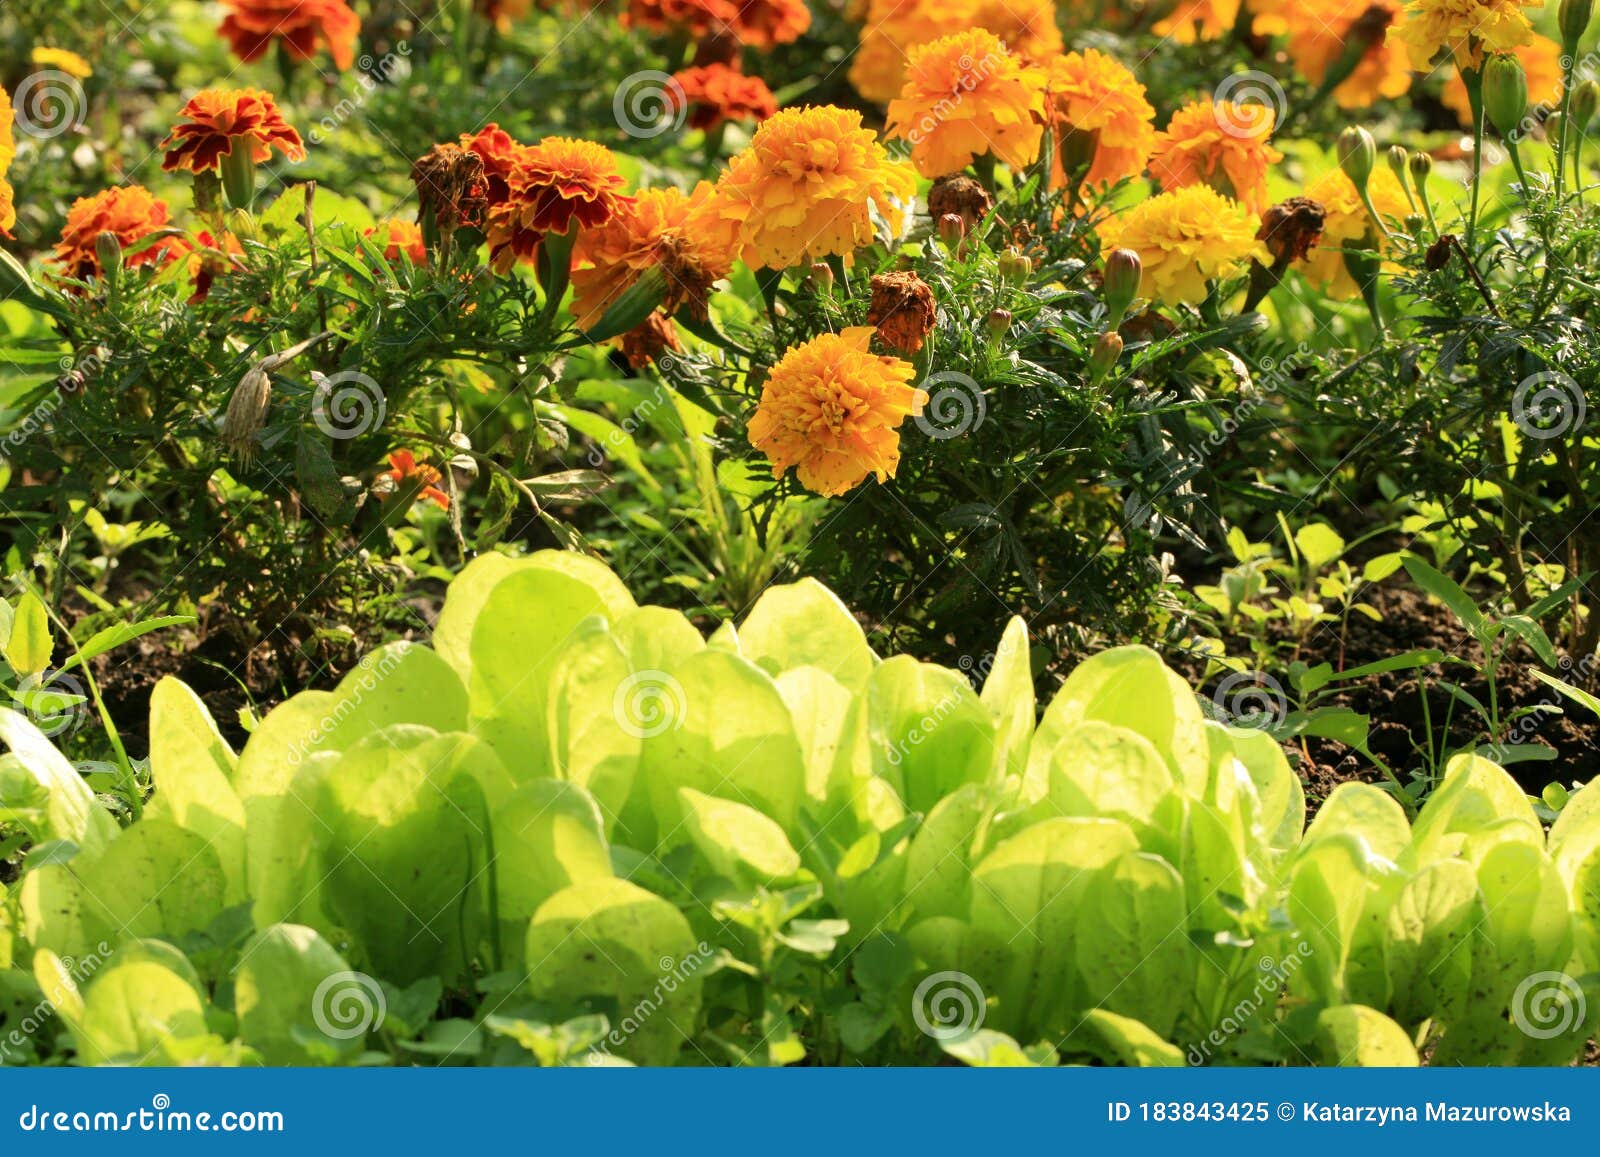 tagetes flower with lettuce protects vegetable against parasites and diseases.